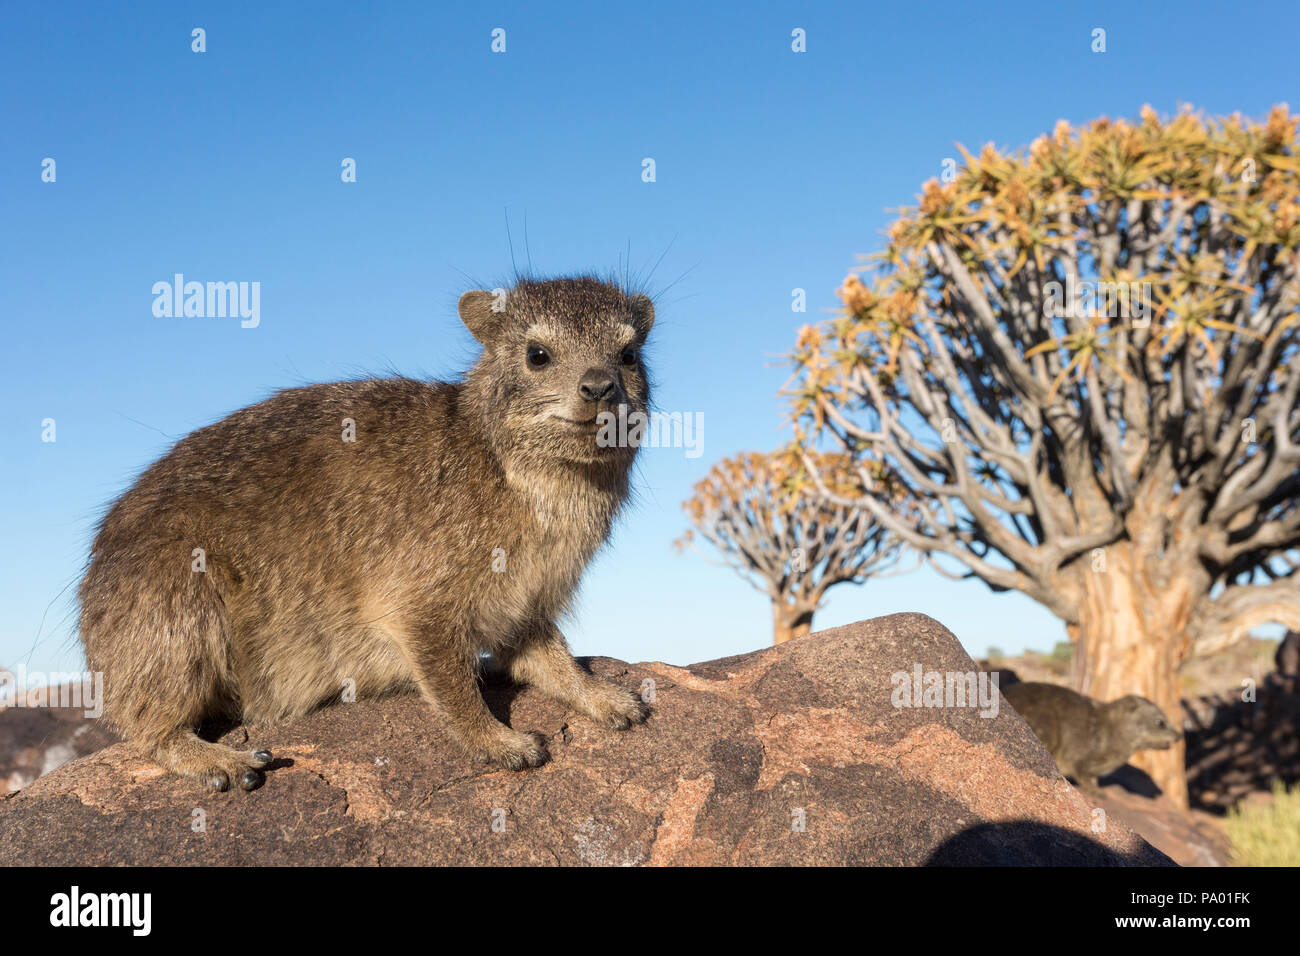 Rock hyrax (Procavia capensis), Quiver Tree Forest, Keetmanshoop, Namibia Foto Stock